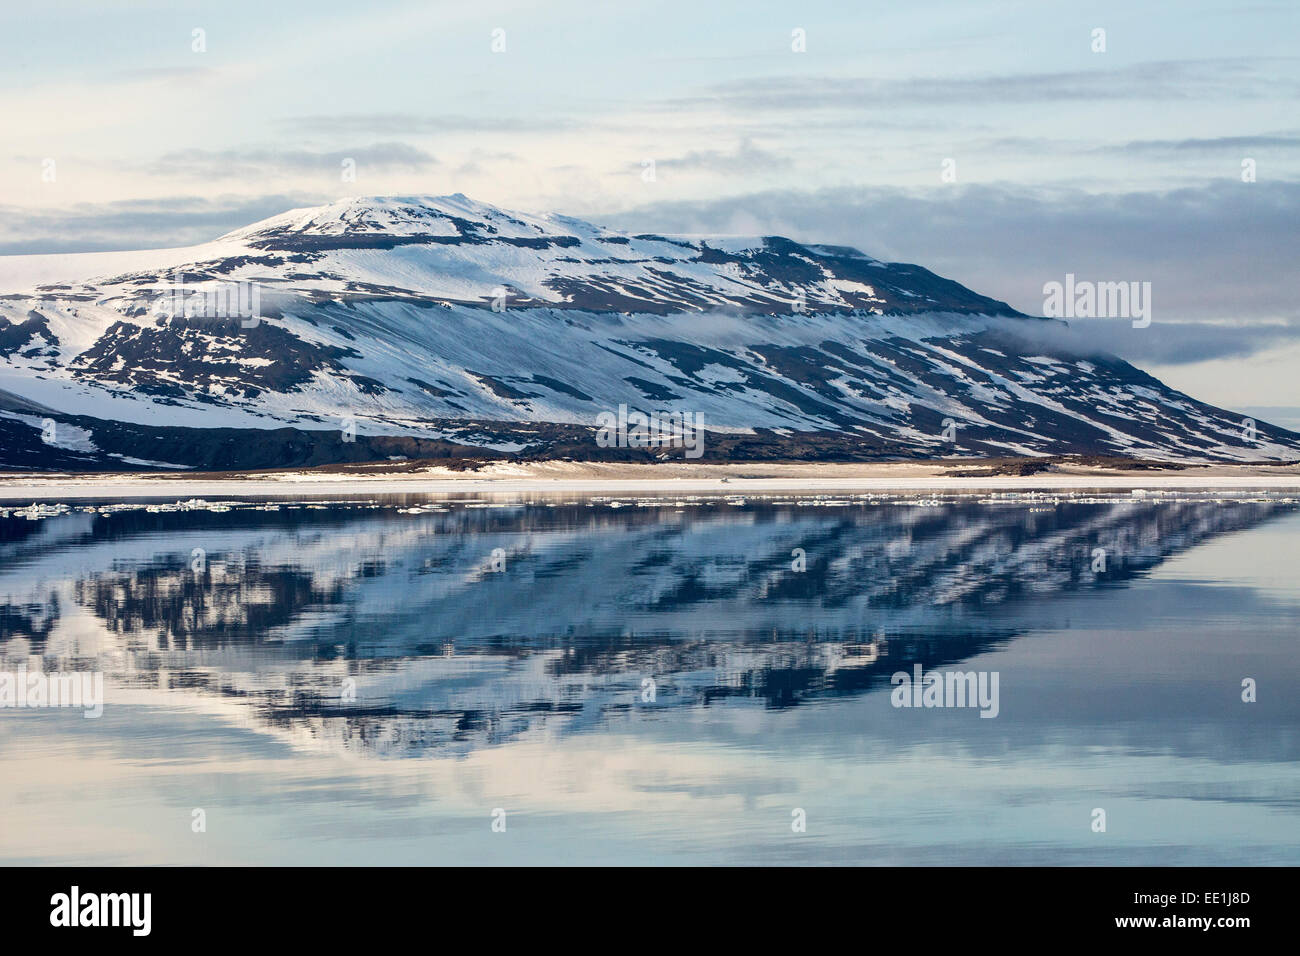 Snow-capped mountains reflected in the calm waters of Olga Strait, Svalbard, Arctic, Norway, Scandinavia, Europe Stock Photo